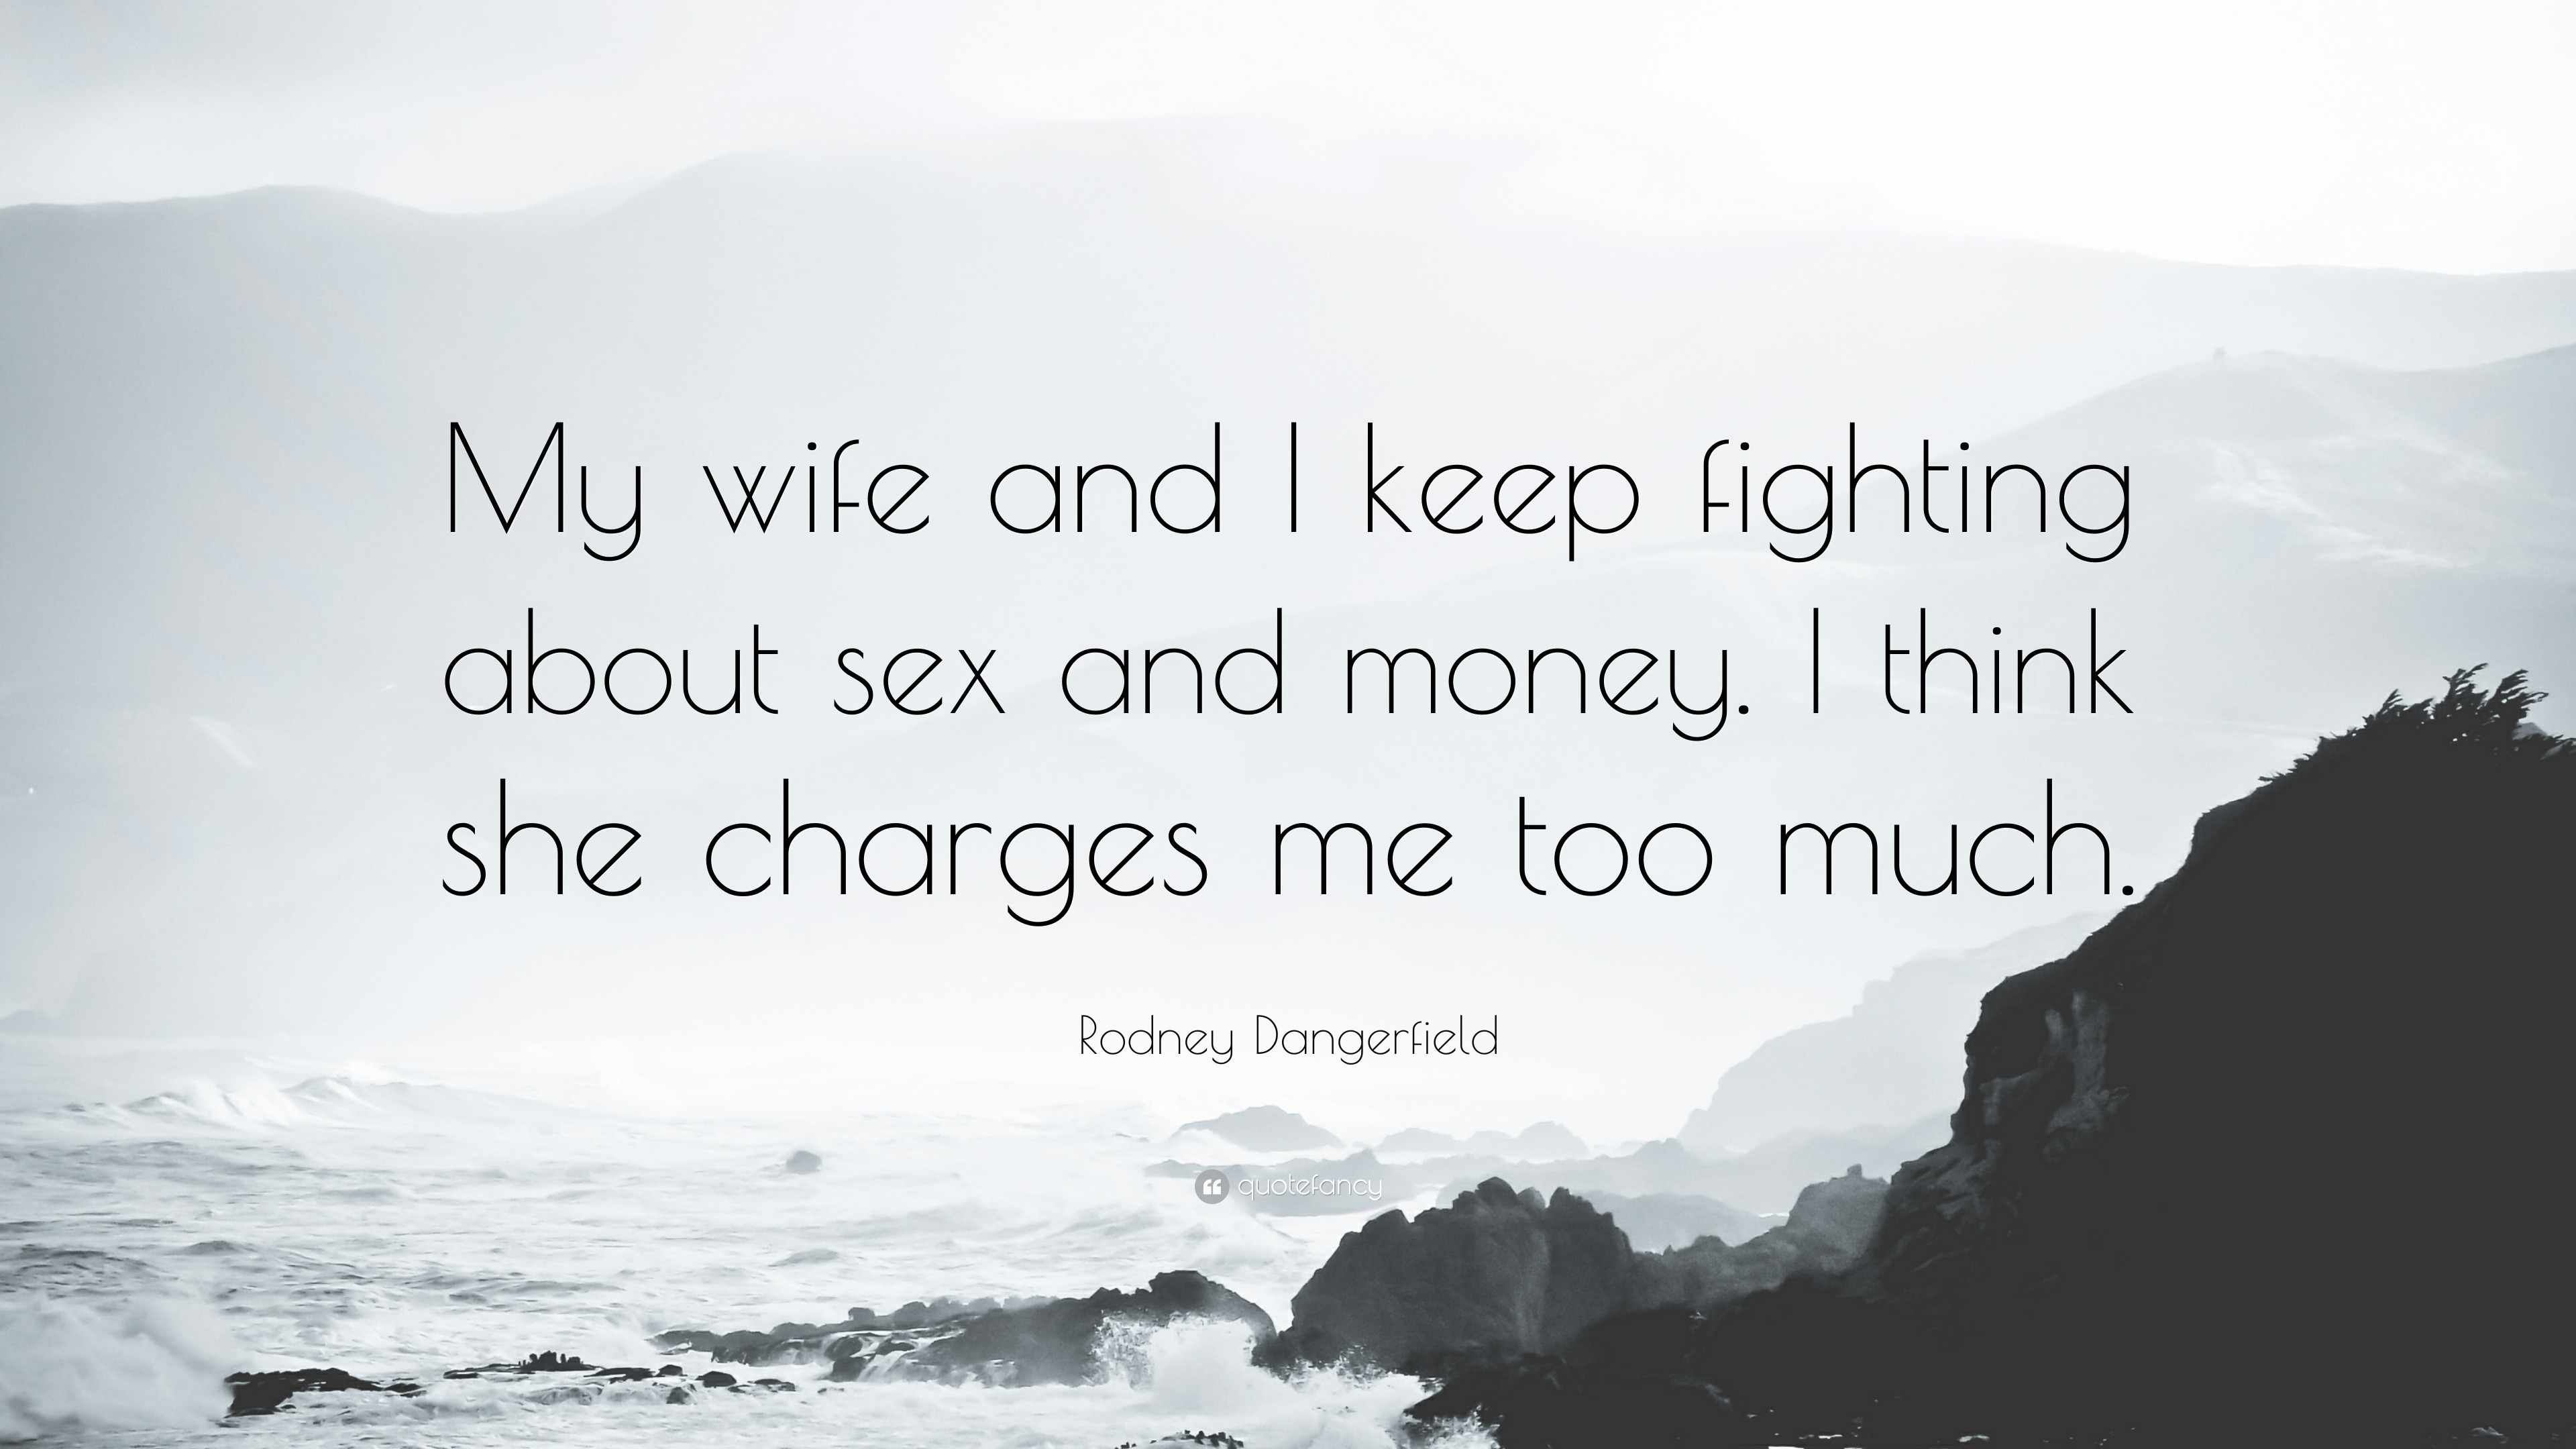 Rodney Dangerfield Quote “My wife and I keep fighting about sex and money pic